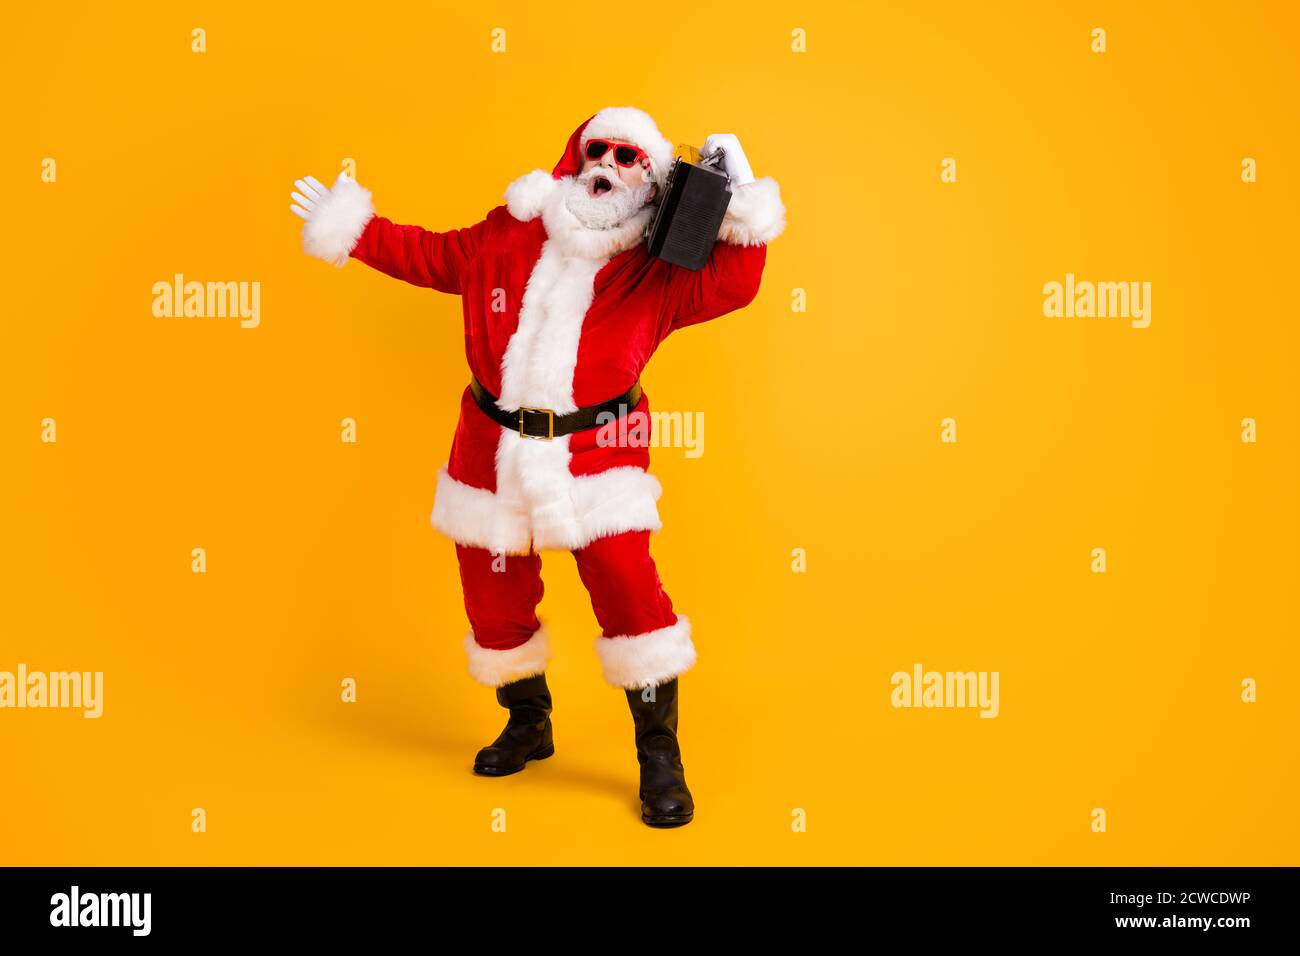 Full length body size view of his he nice funny cheerful cheery  white-haired Santa dj mc deejay carrying boombox dancing having fun  isolated bright Stock Photo - Alamy